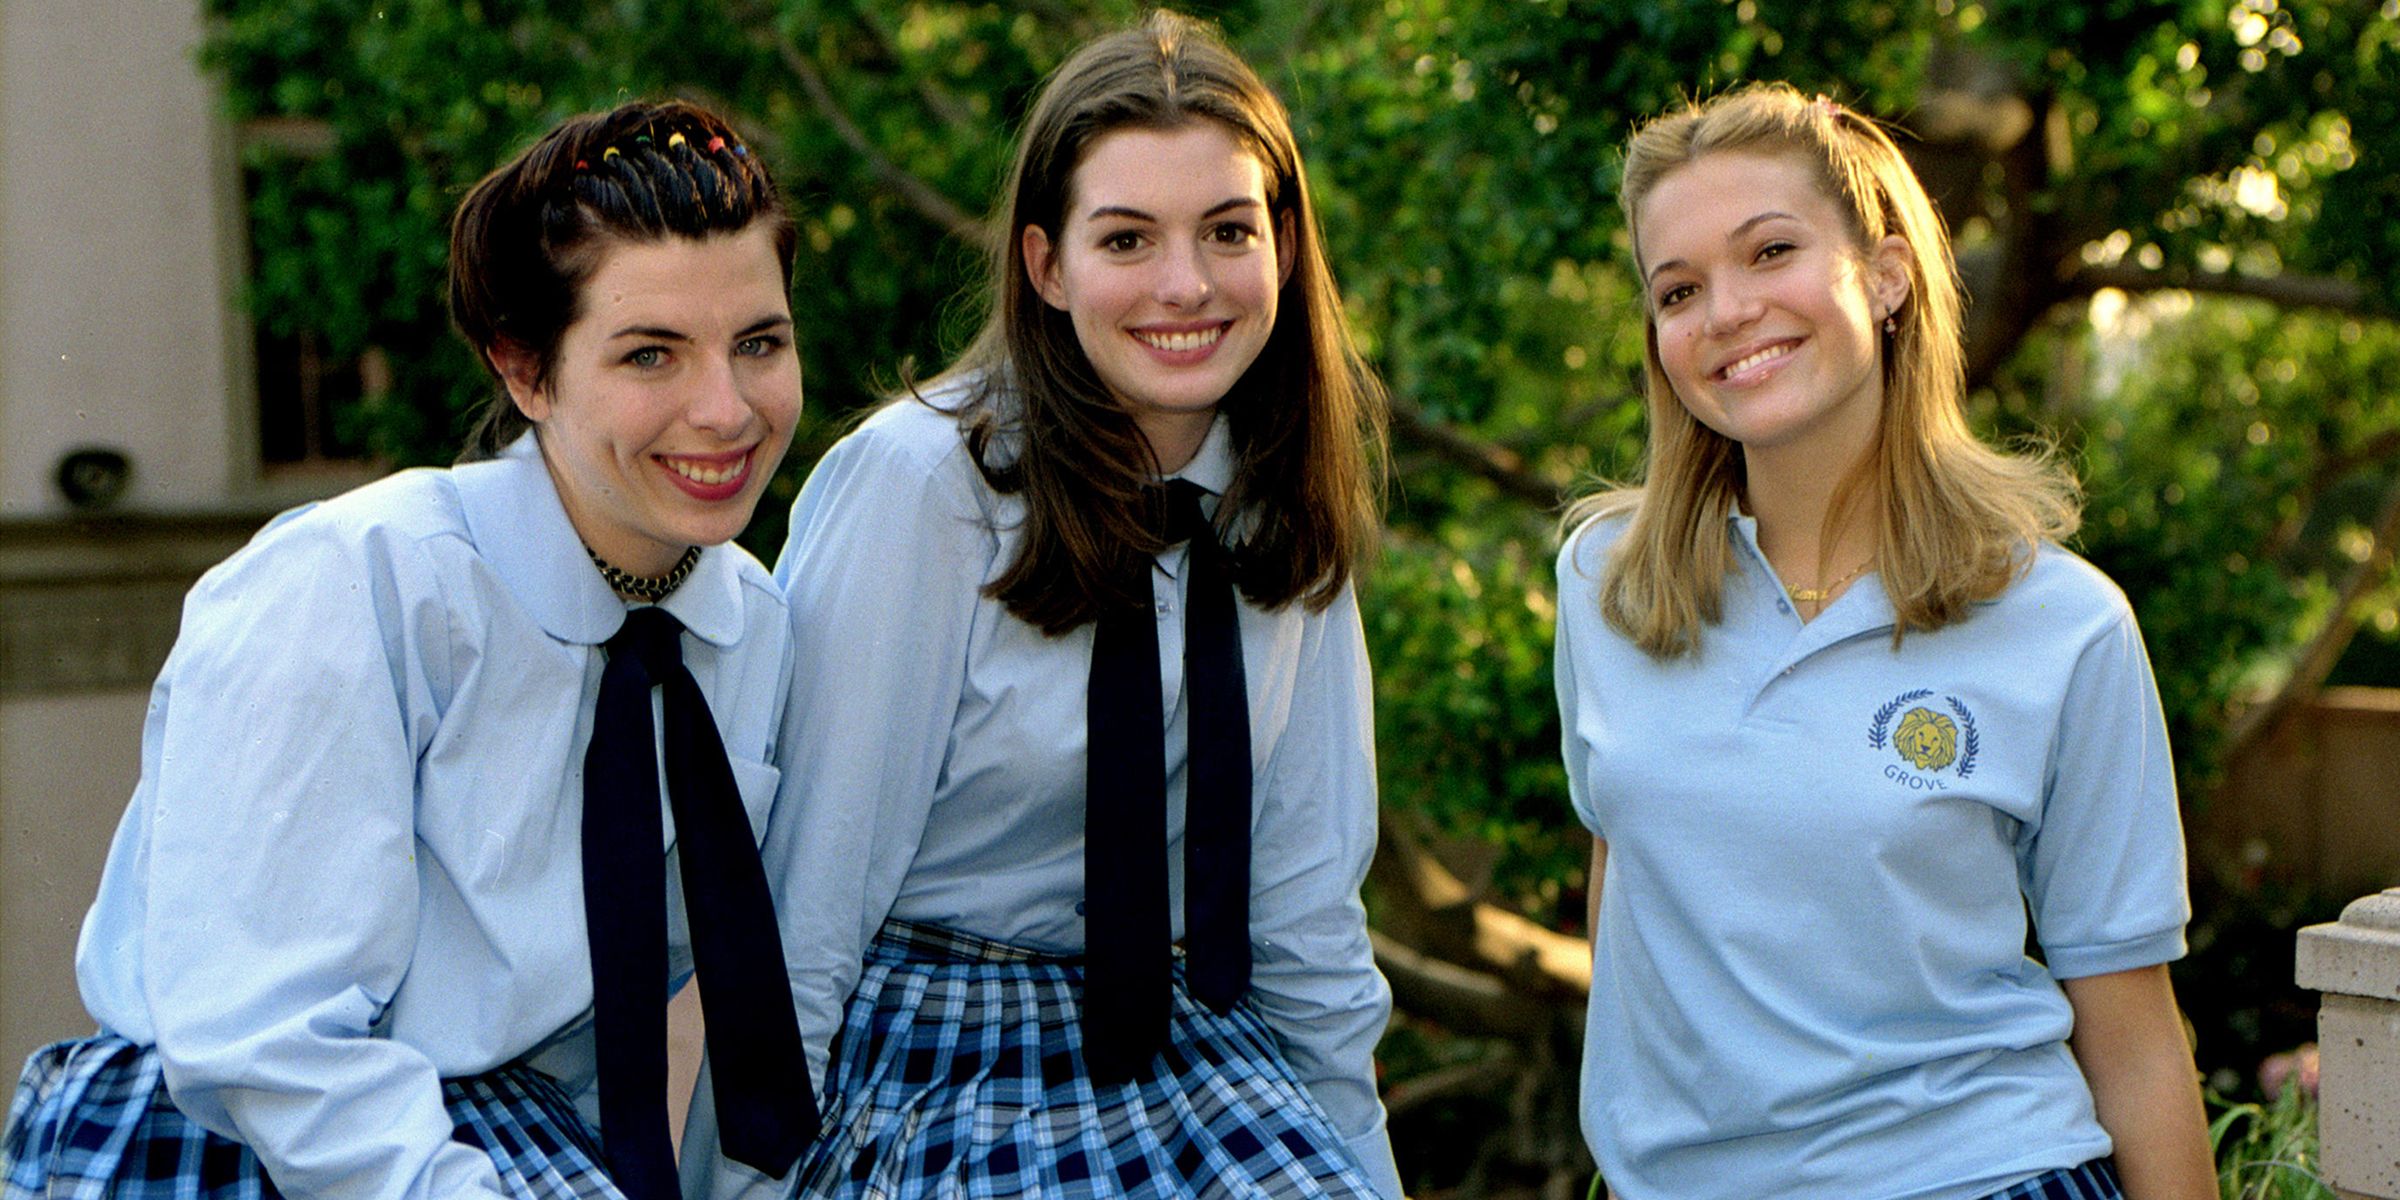 Lily, Mia, and Lana smiling together in The Princess Diaries